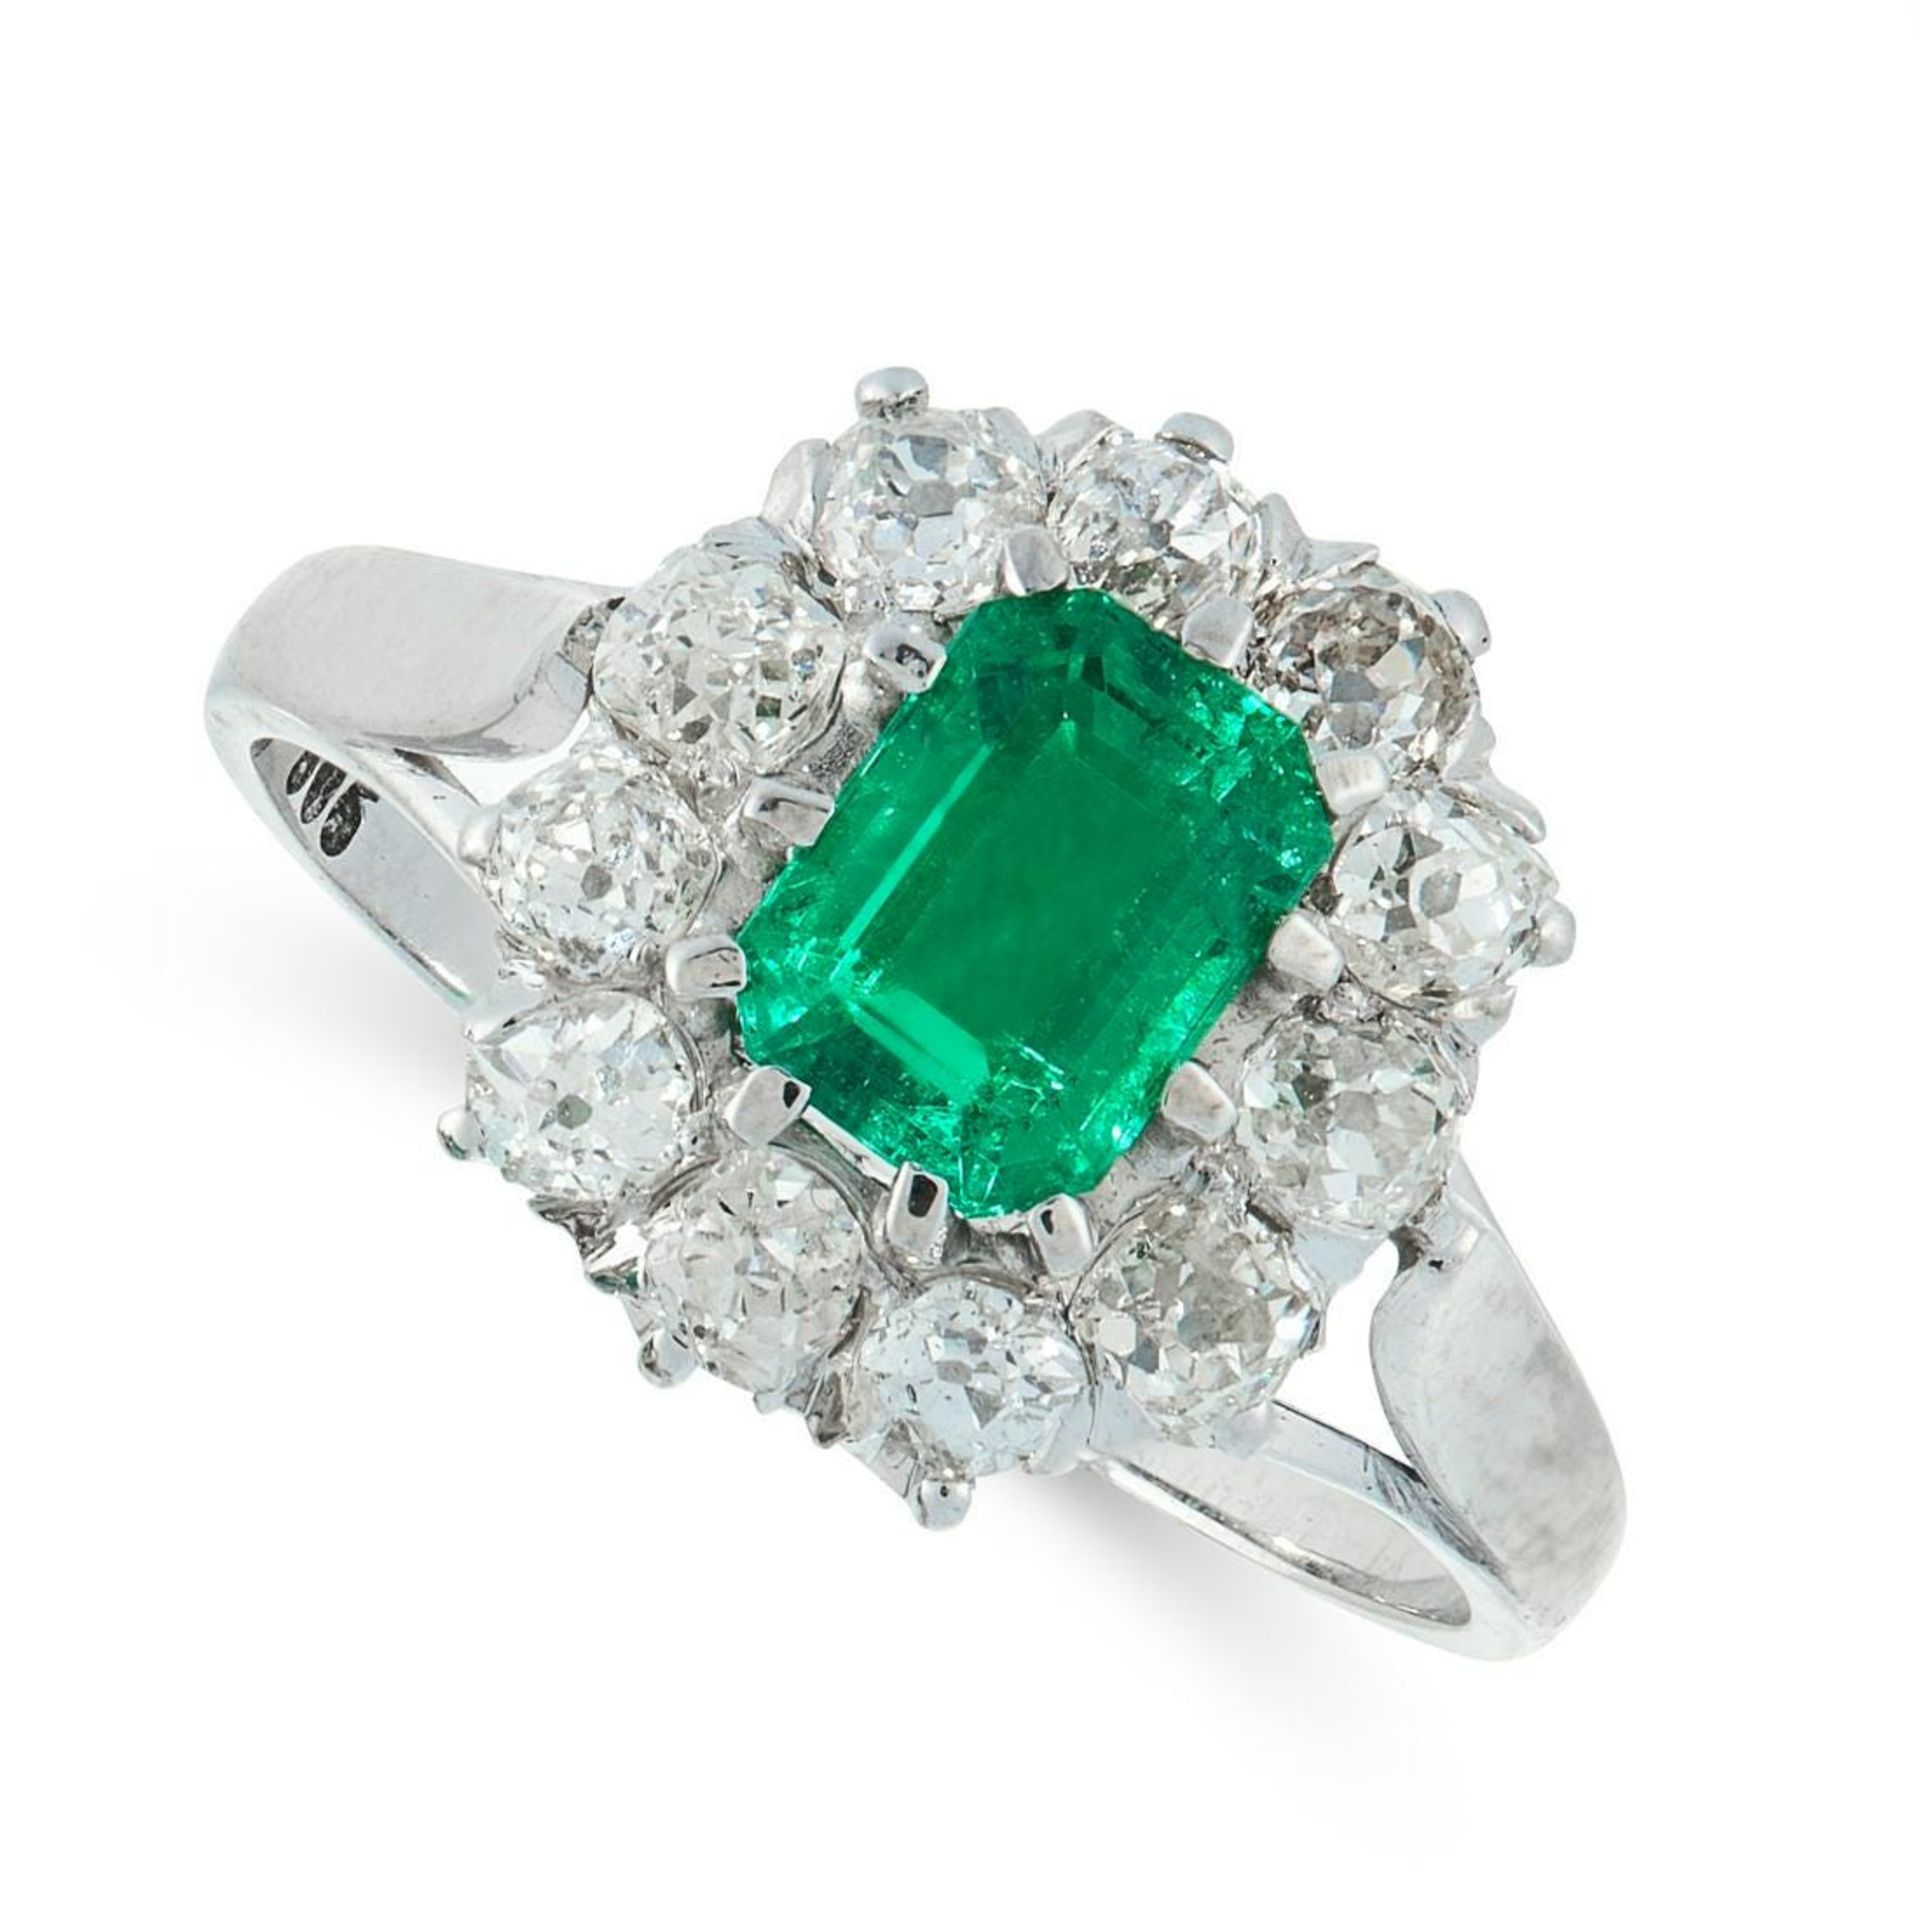 A COLOMBIAN EMERALD AND DIAMOND DRESS RING in 14ct white gold, set with an emerald cut emerald of